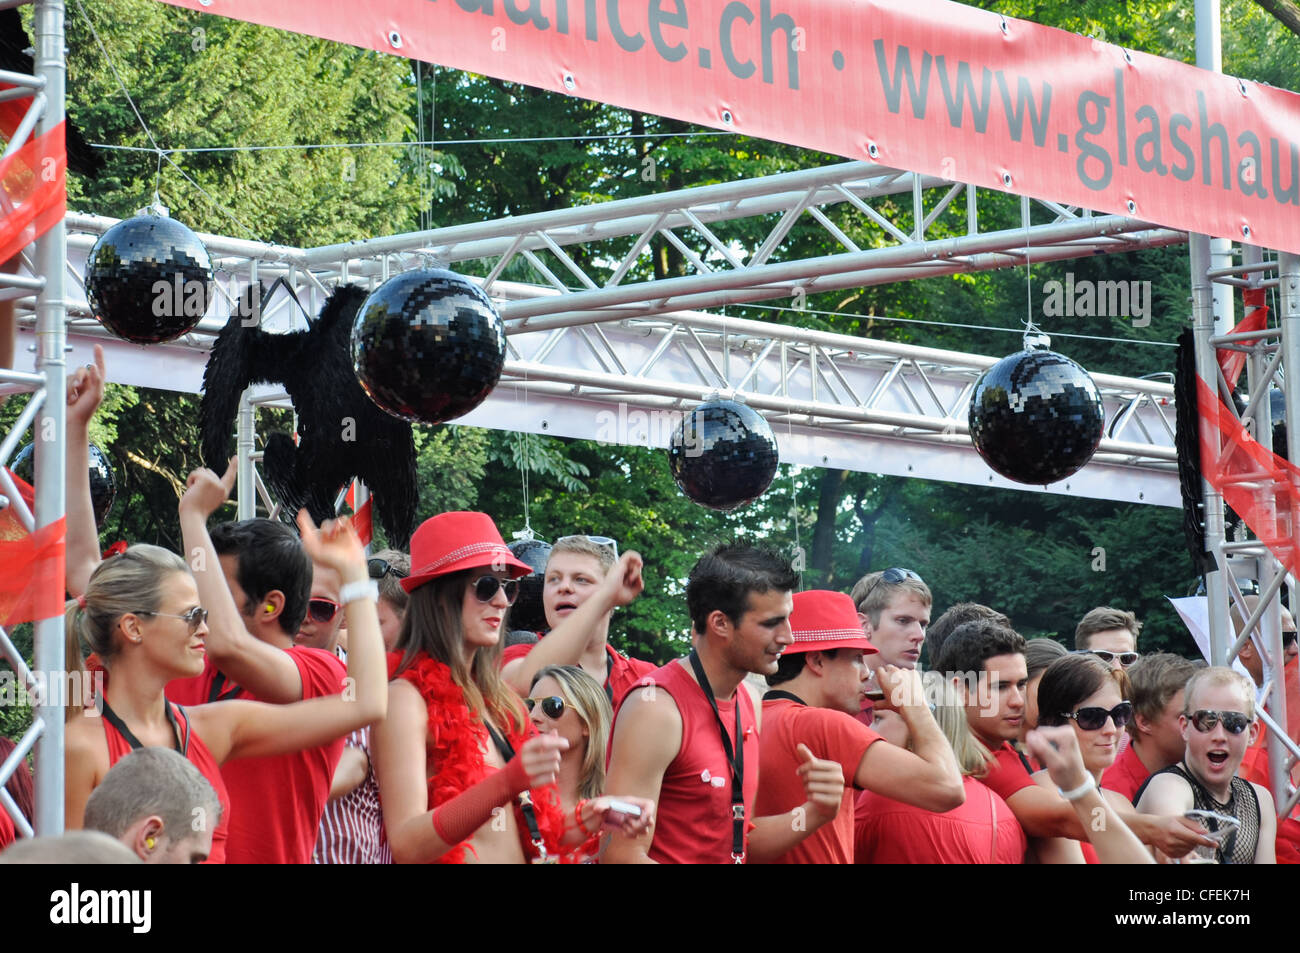 People wearing red clothes dancing during the Street Parade 2011 in Zurich. Stock Photo